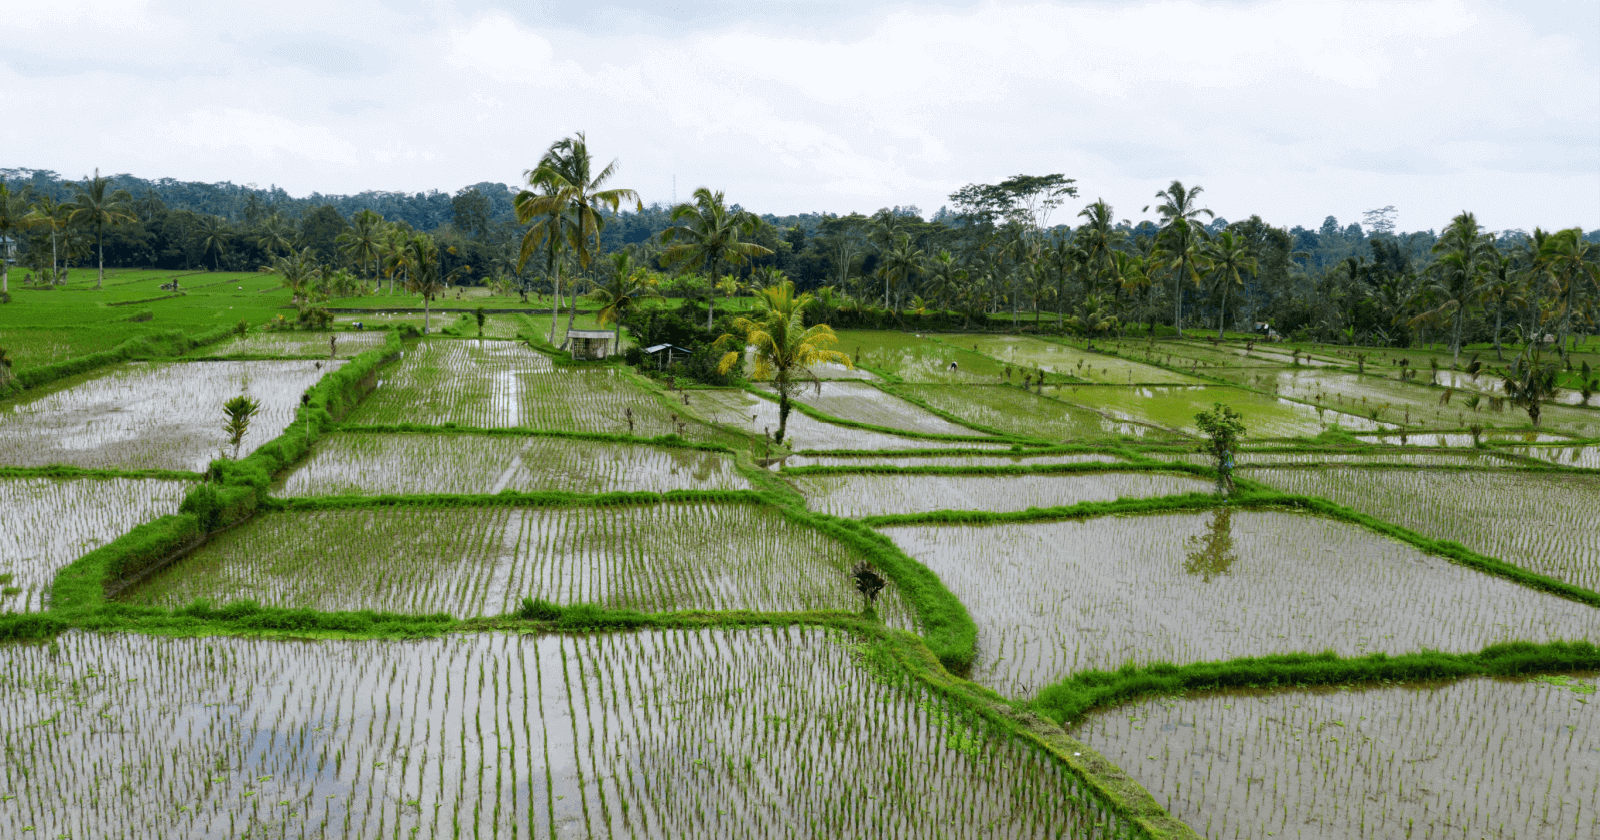 explore-the-rice-terraces-of-tegalalang